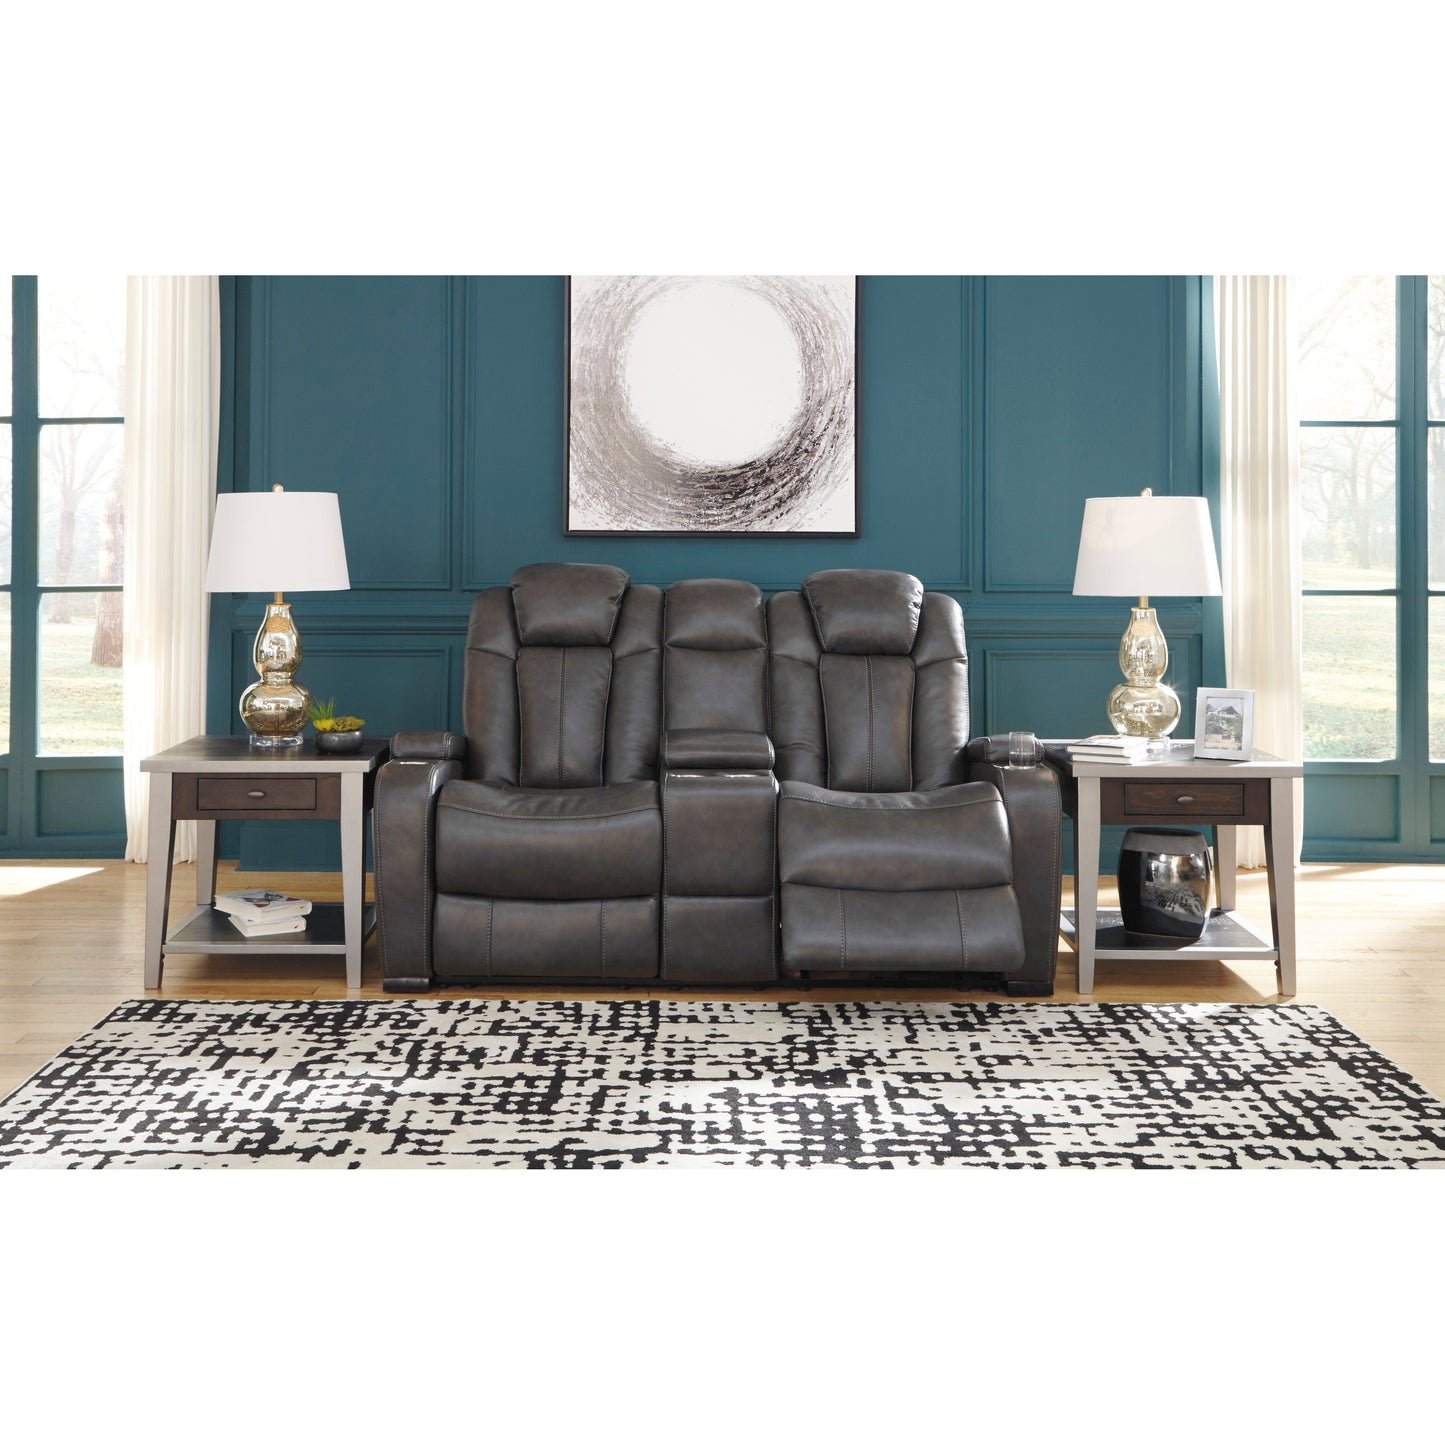 TURBULANCE POWER RECLINING LOVESEAT WITH CONSOLE - QUARRY